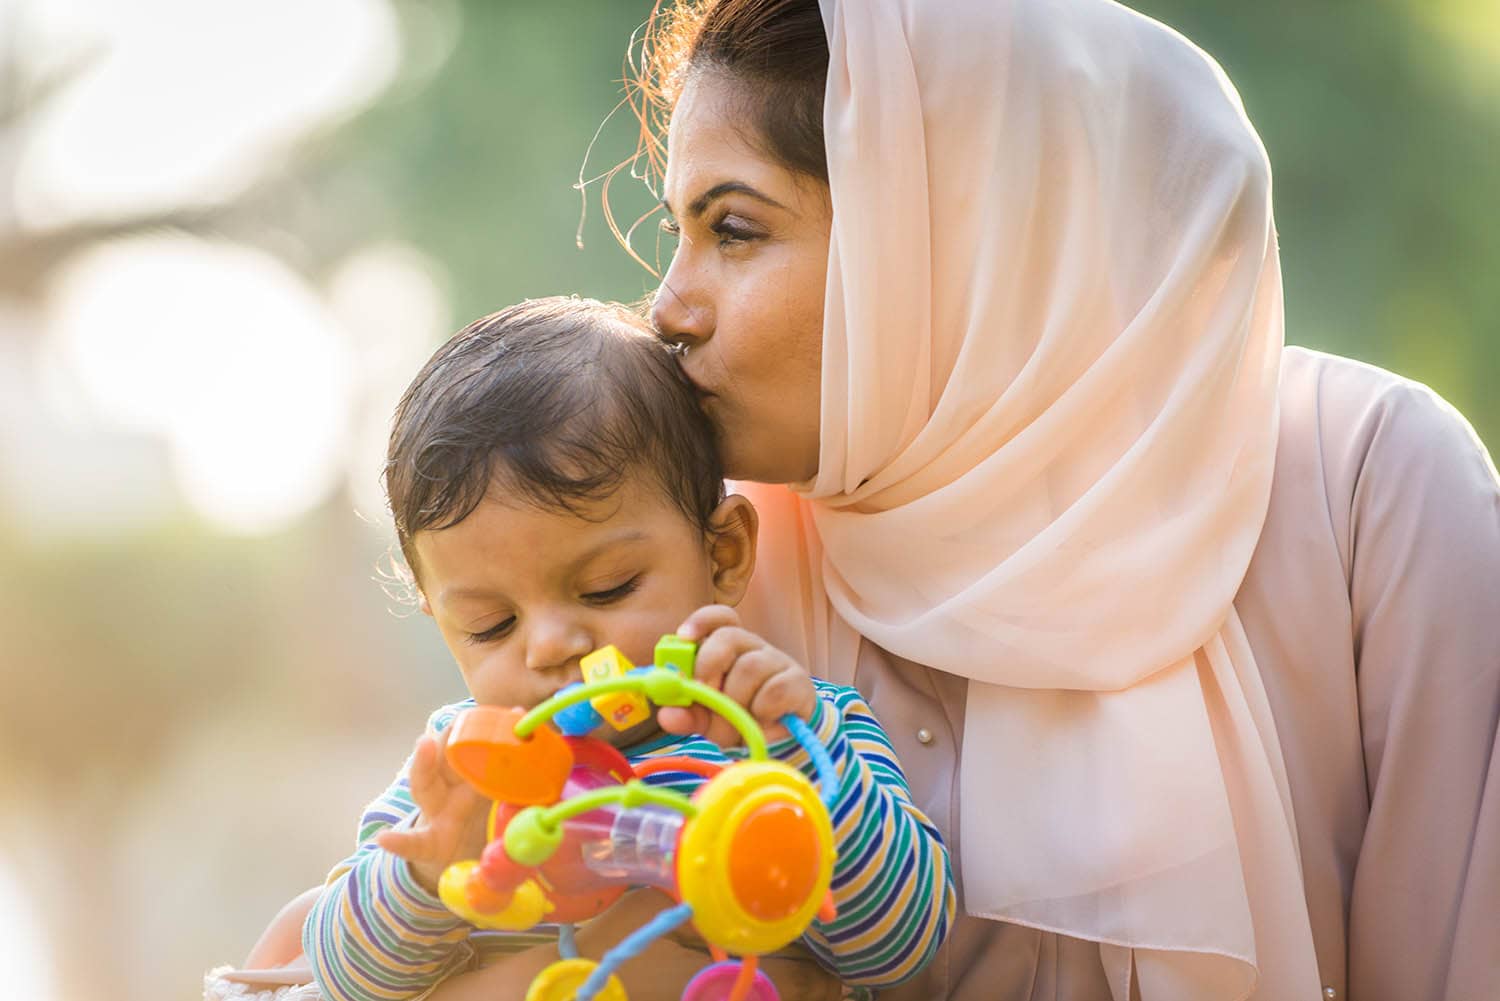 Woman Wearing Headscarf Kissing Her Baby On The Head